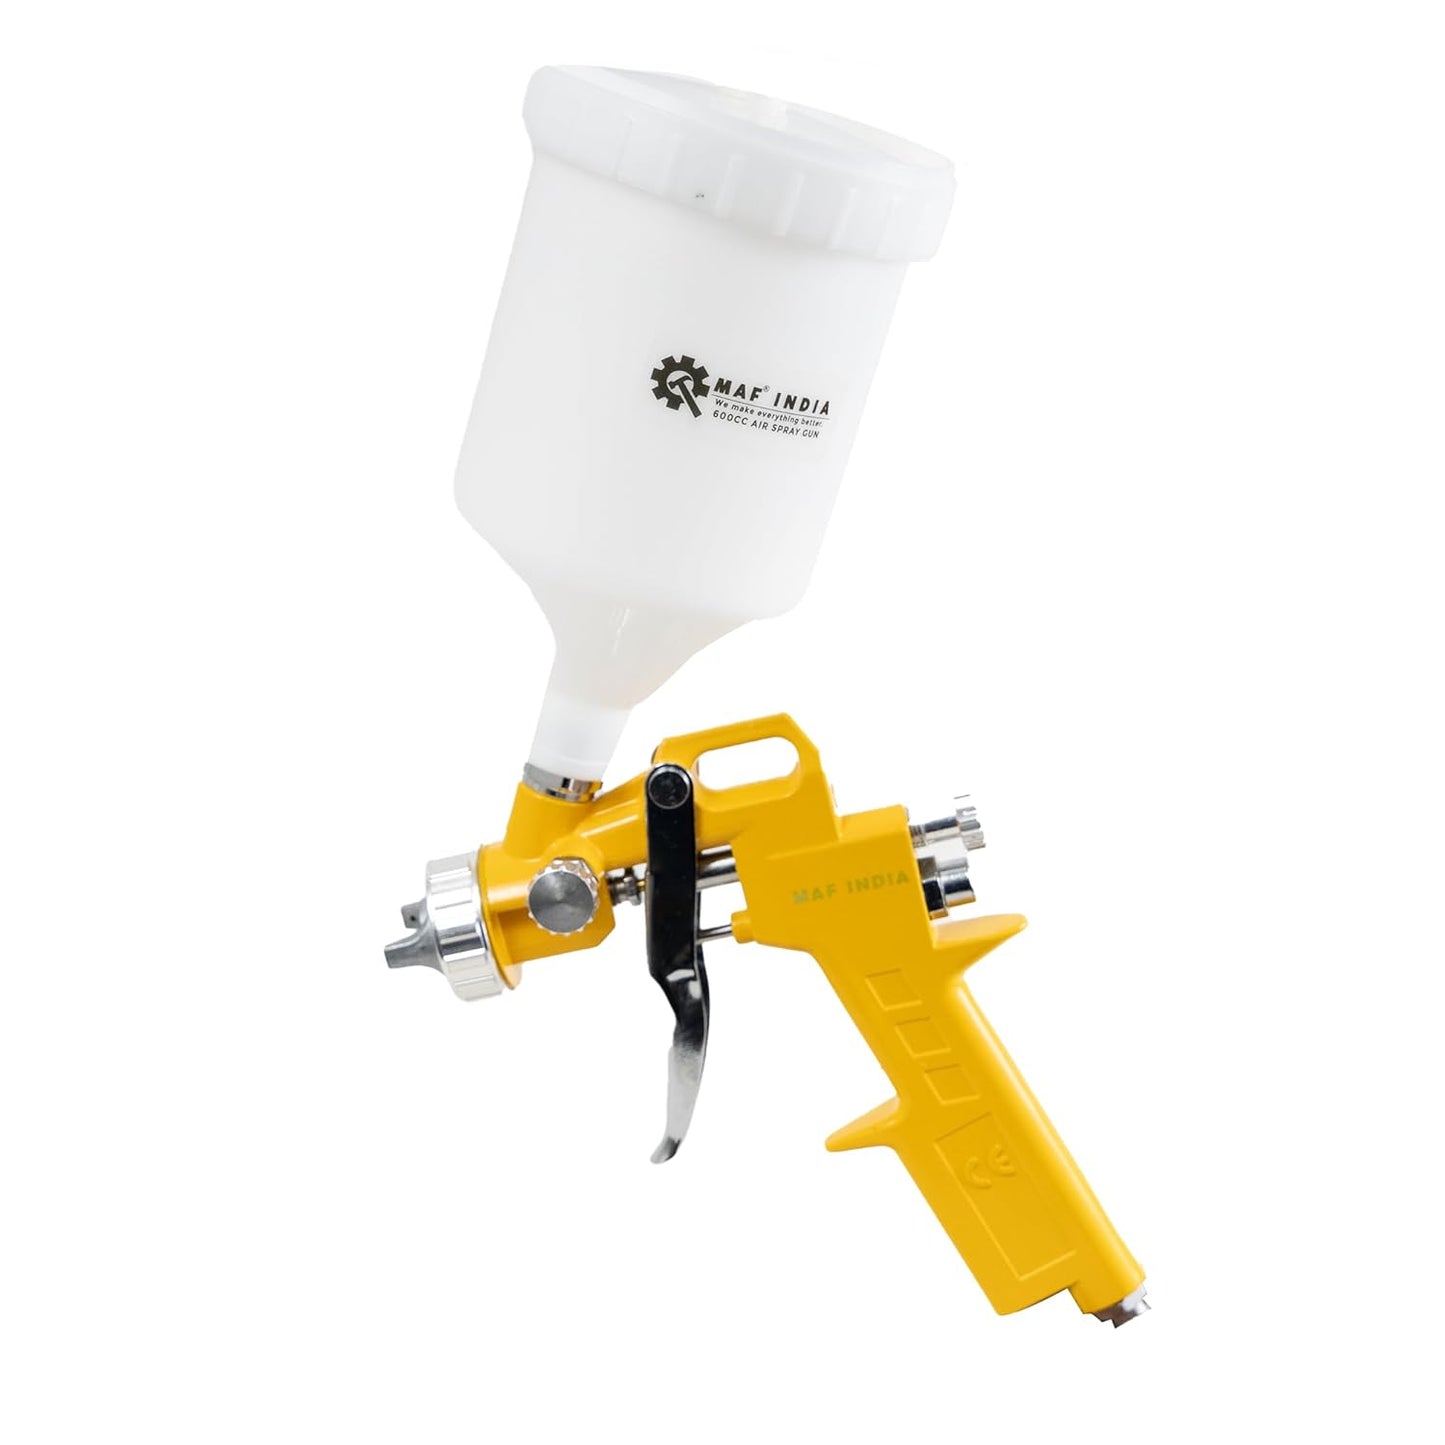 MAF PRO ASG6006 Air Spray Gun, 400ml Capacity | 1.5mm Nozzle Stainless Steel | 3-4 Bar Pressure | Suitable for Base Coat Spray Gun for Auto Paint